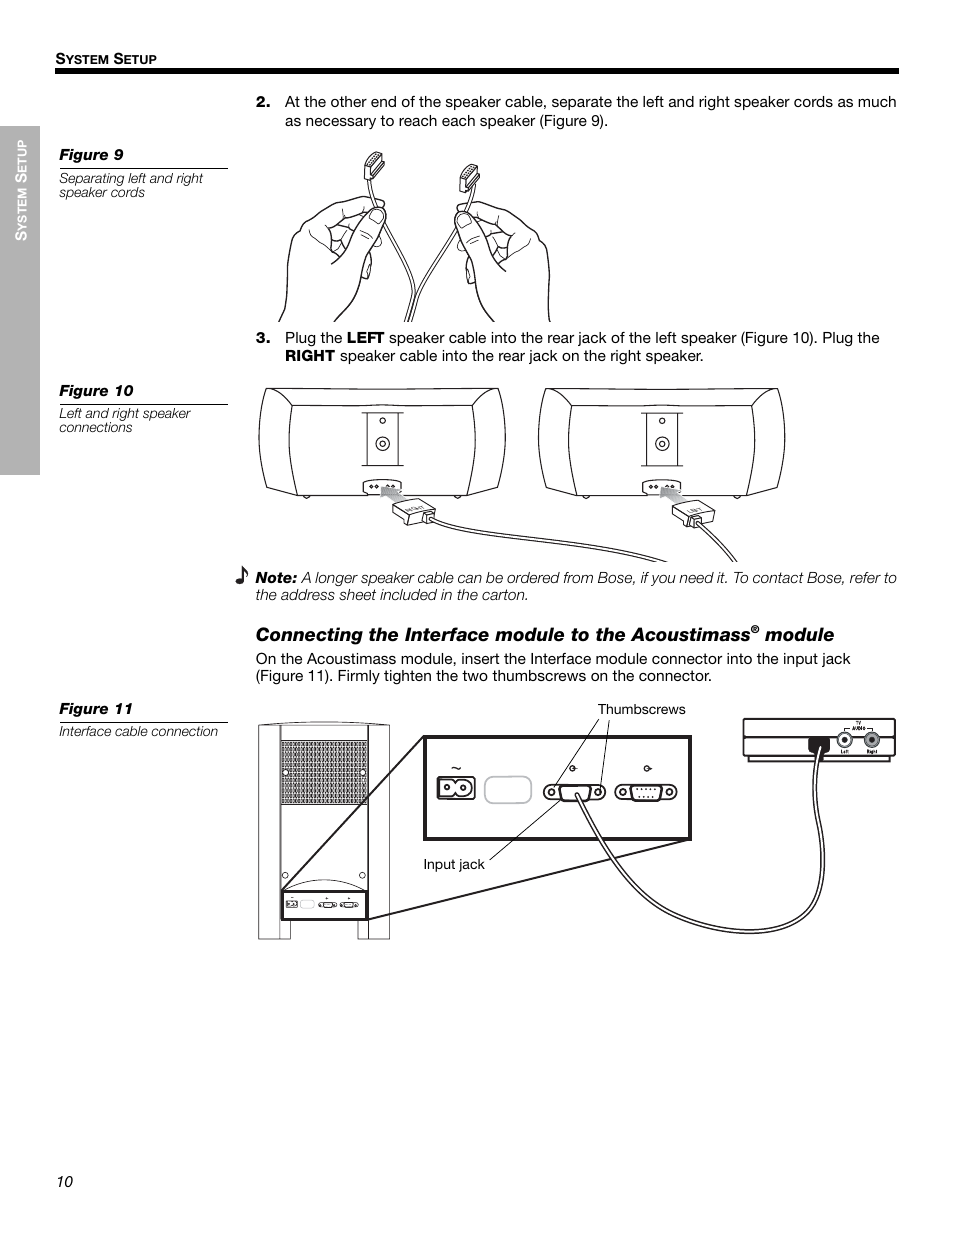 Connecting the interface module to the acoustimass, Module | Bose Cinemate  Digital Home Theater Speaker System User Manual | Page 10 / 24 | Original  mode